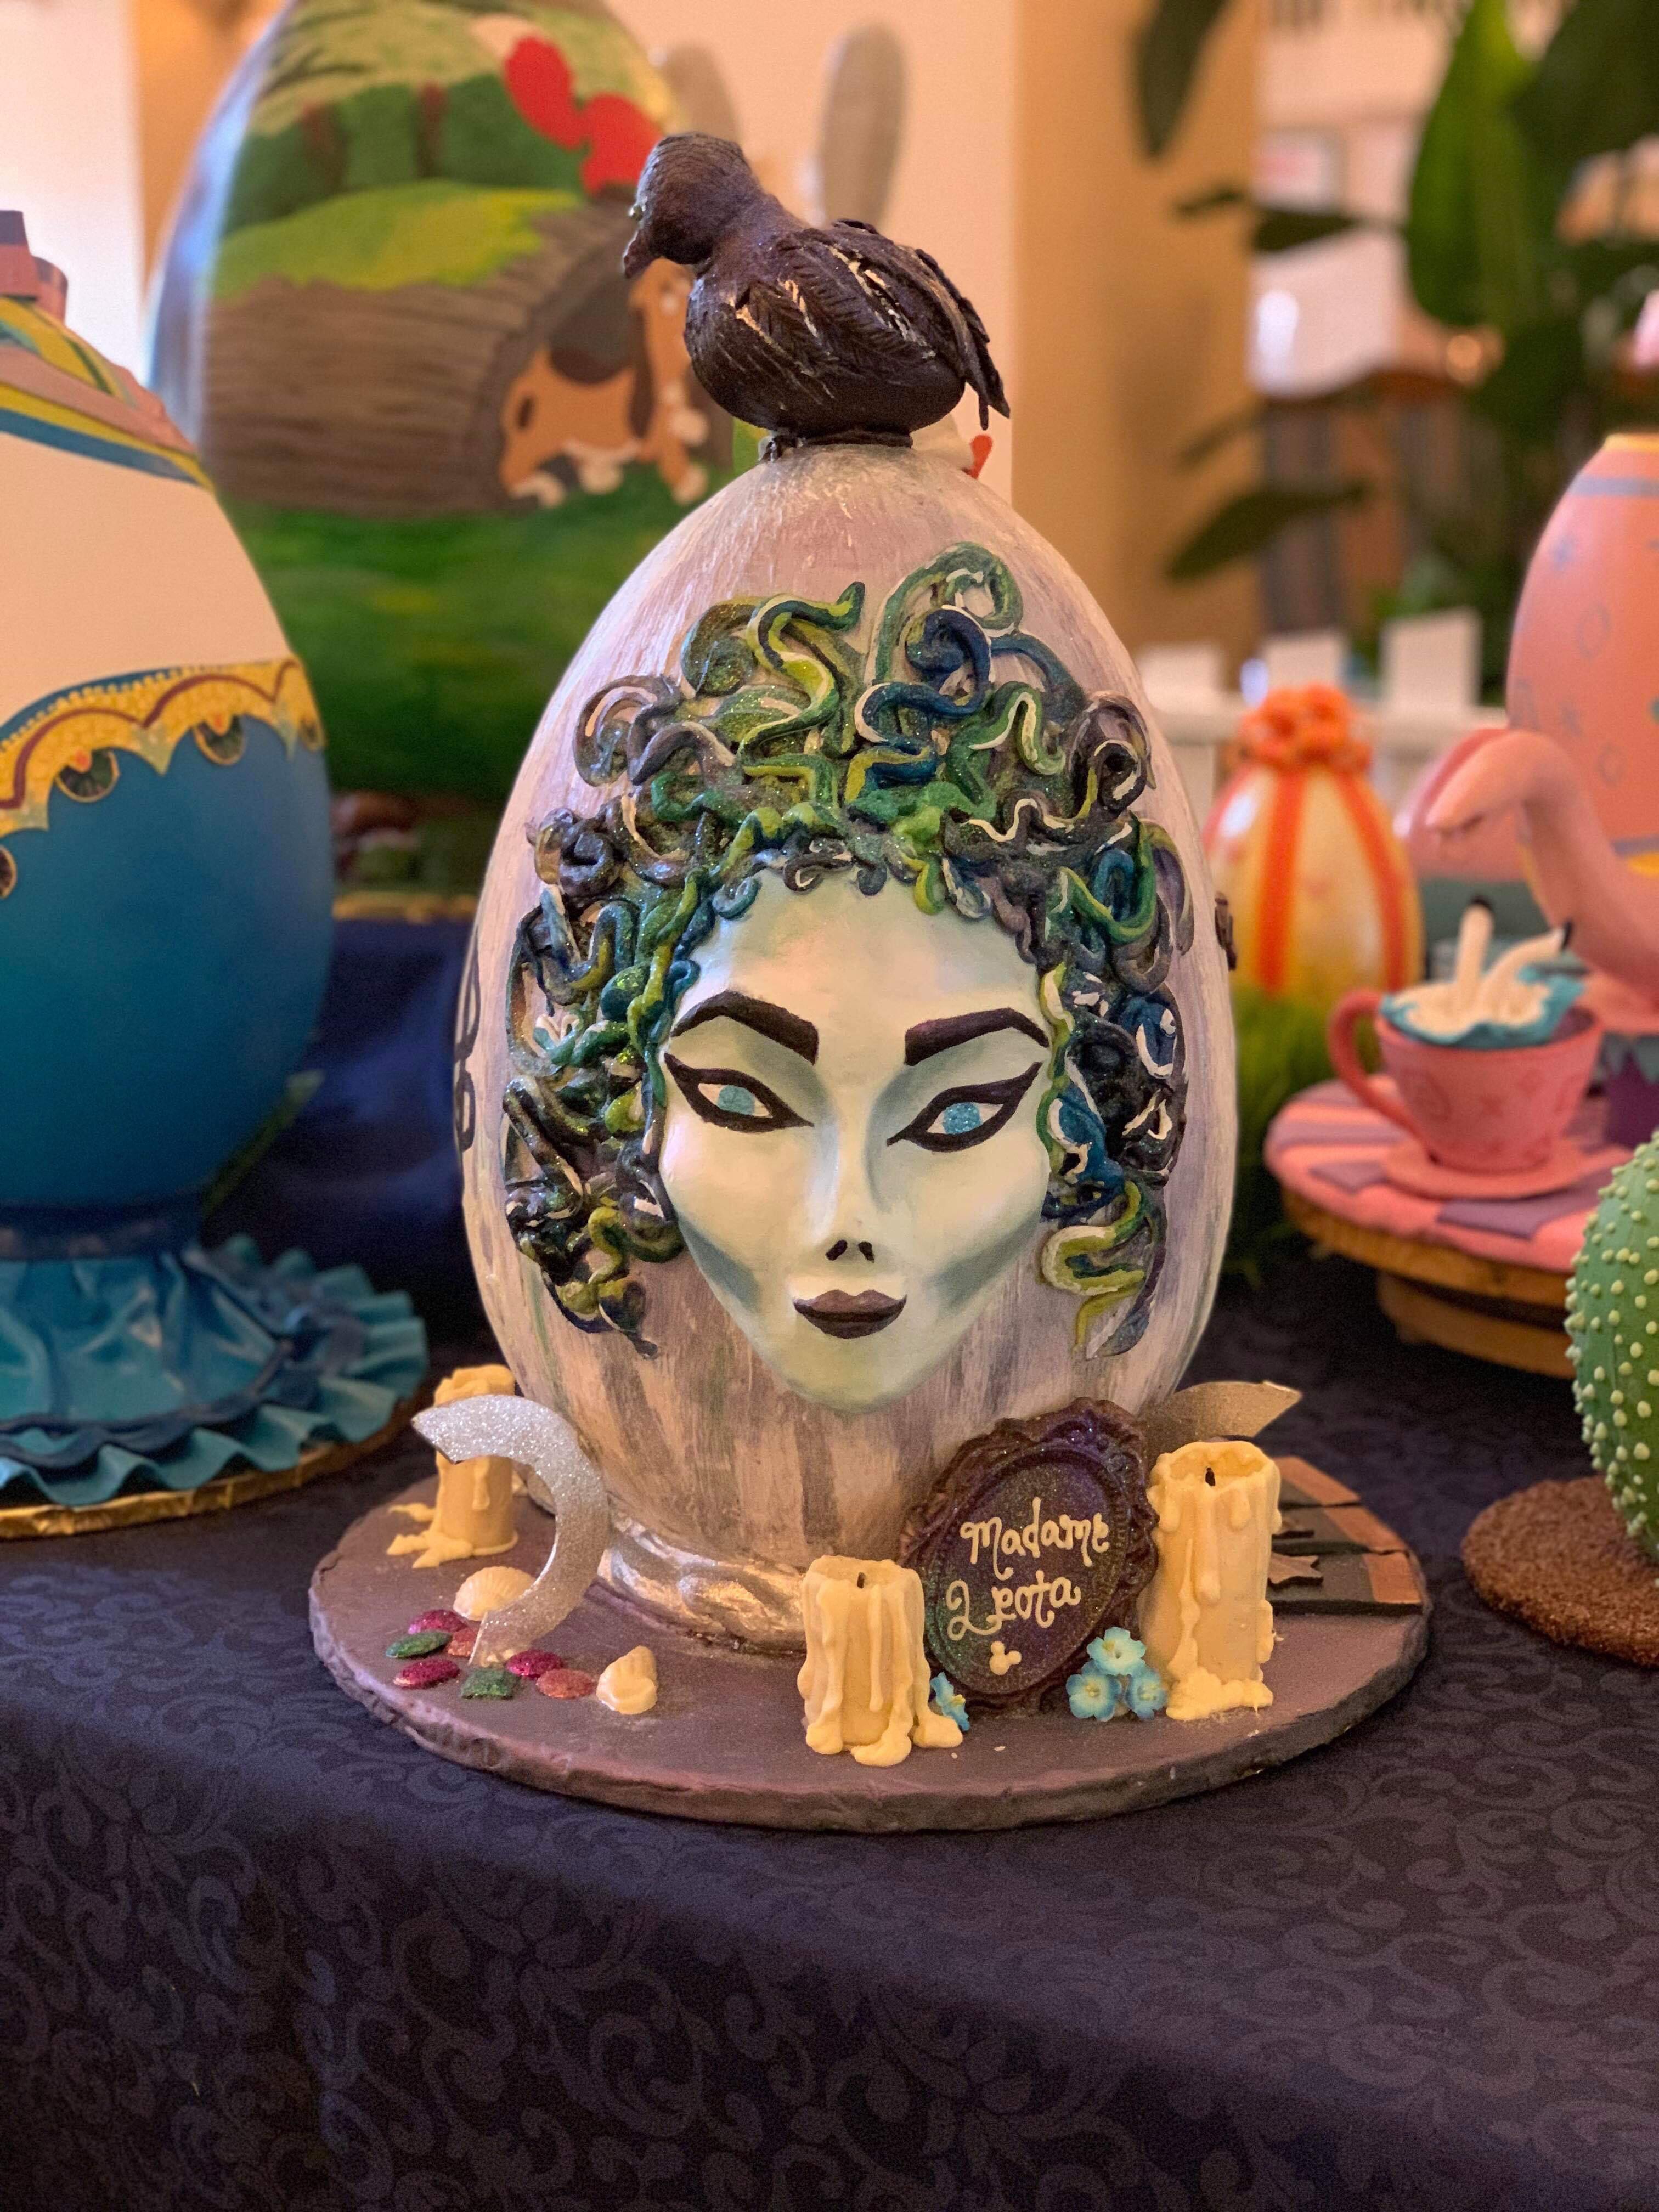 The 2019 Easter Egg Display At Disney’s Yacht & Beach Club Resorts